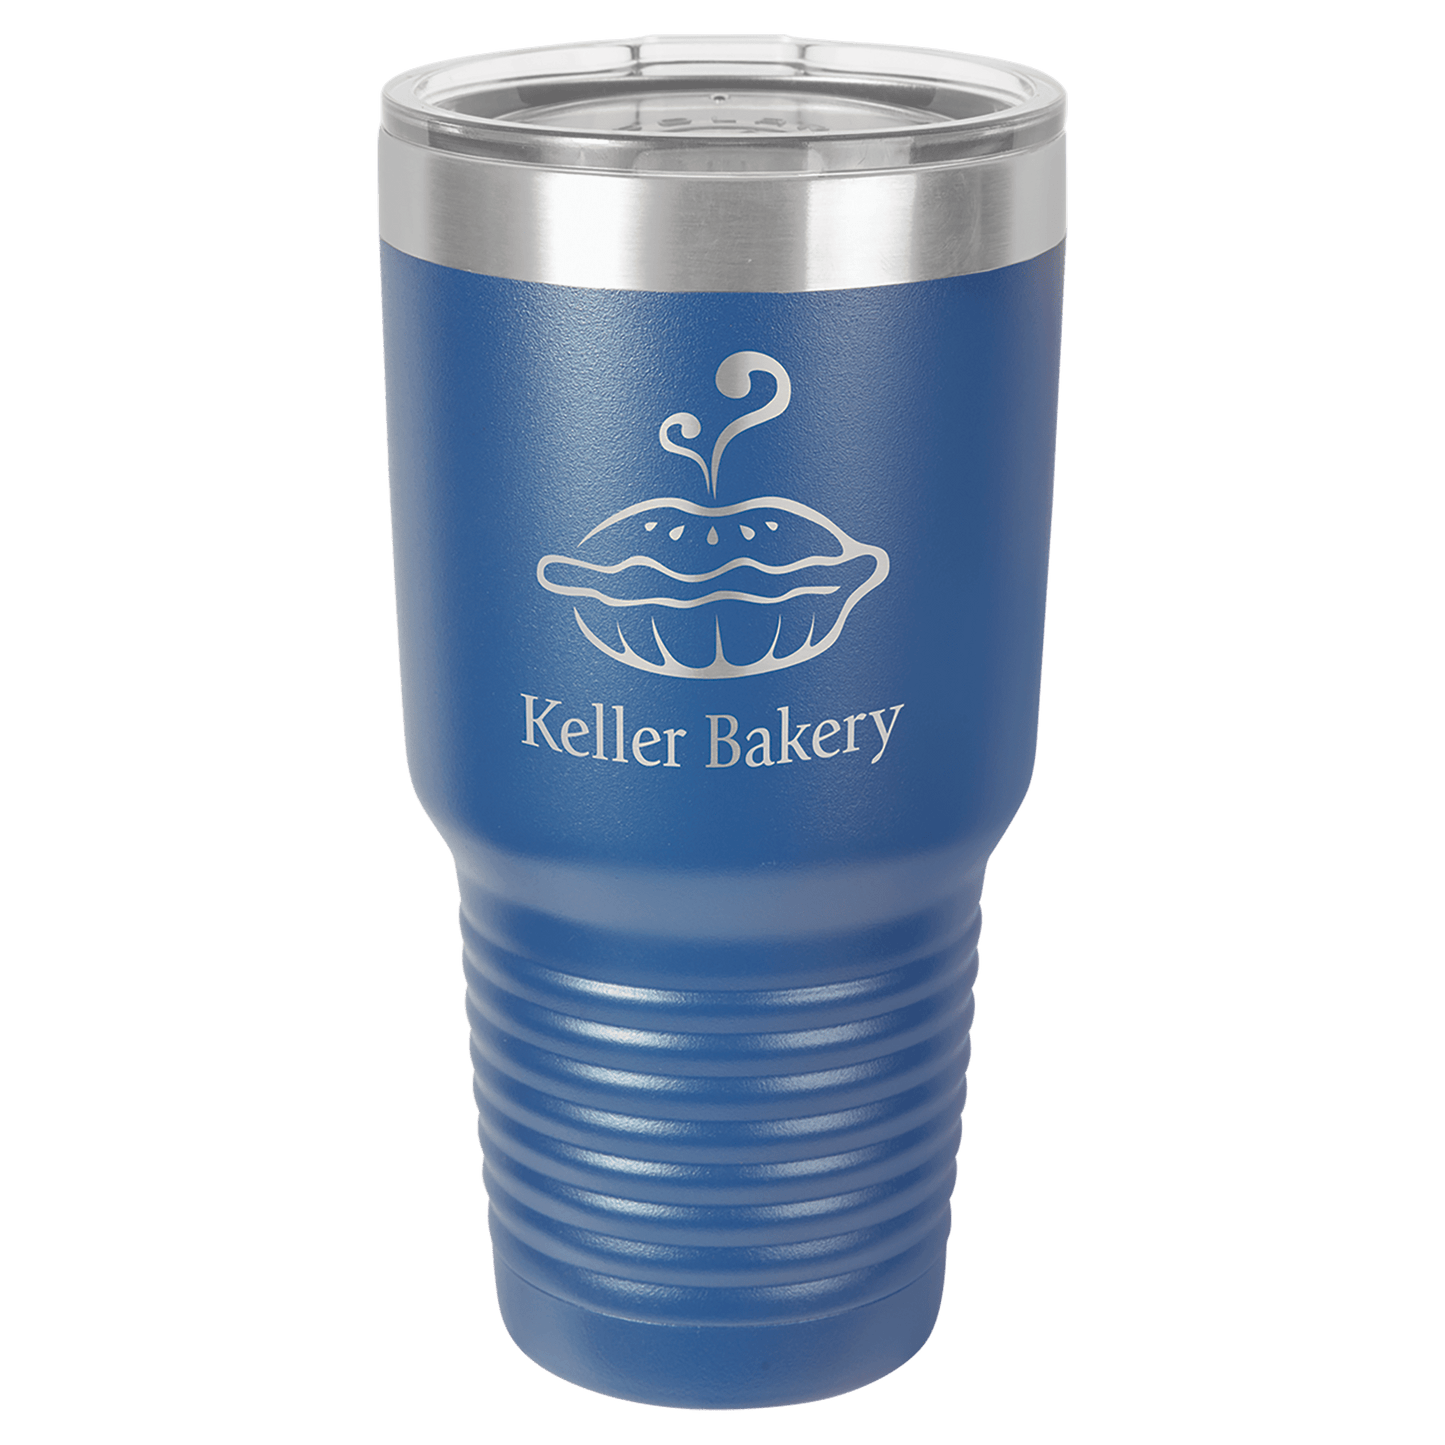 Tumblers, beverage holders, wine glasses, water bottles, sippy cups, and more